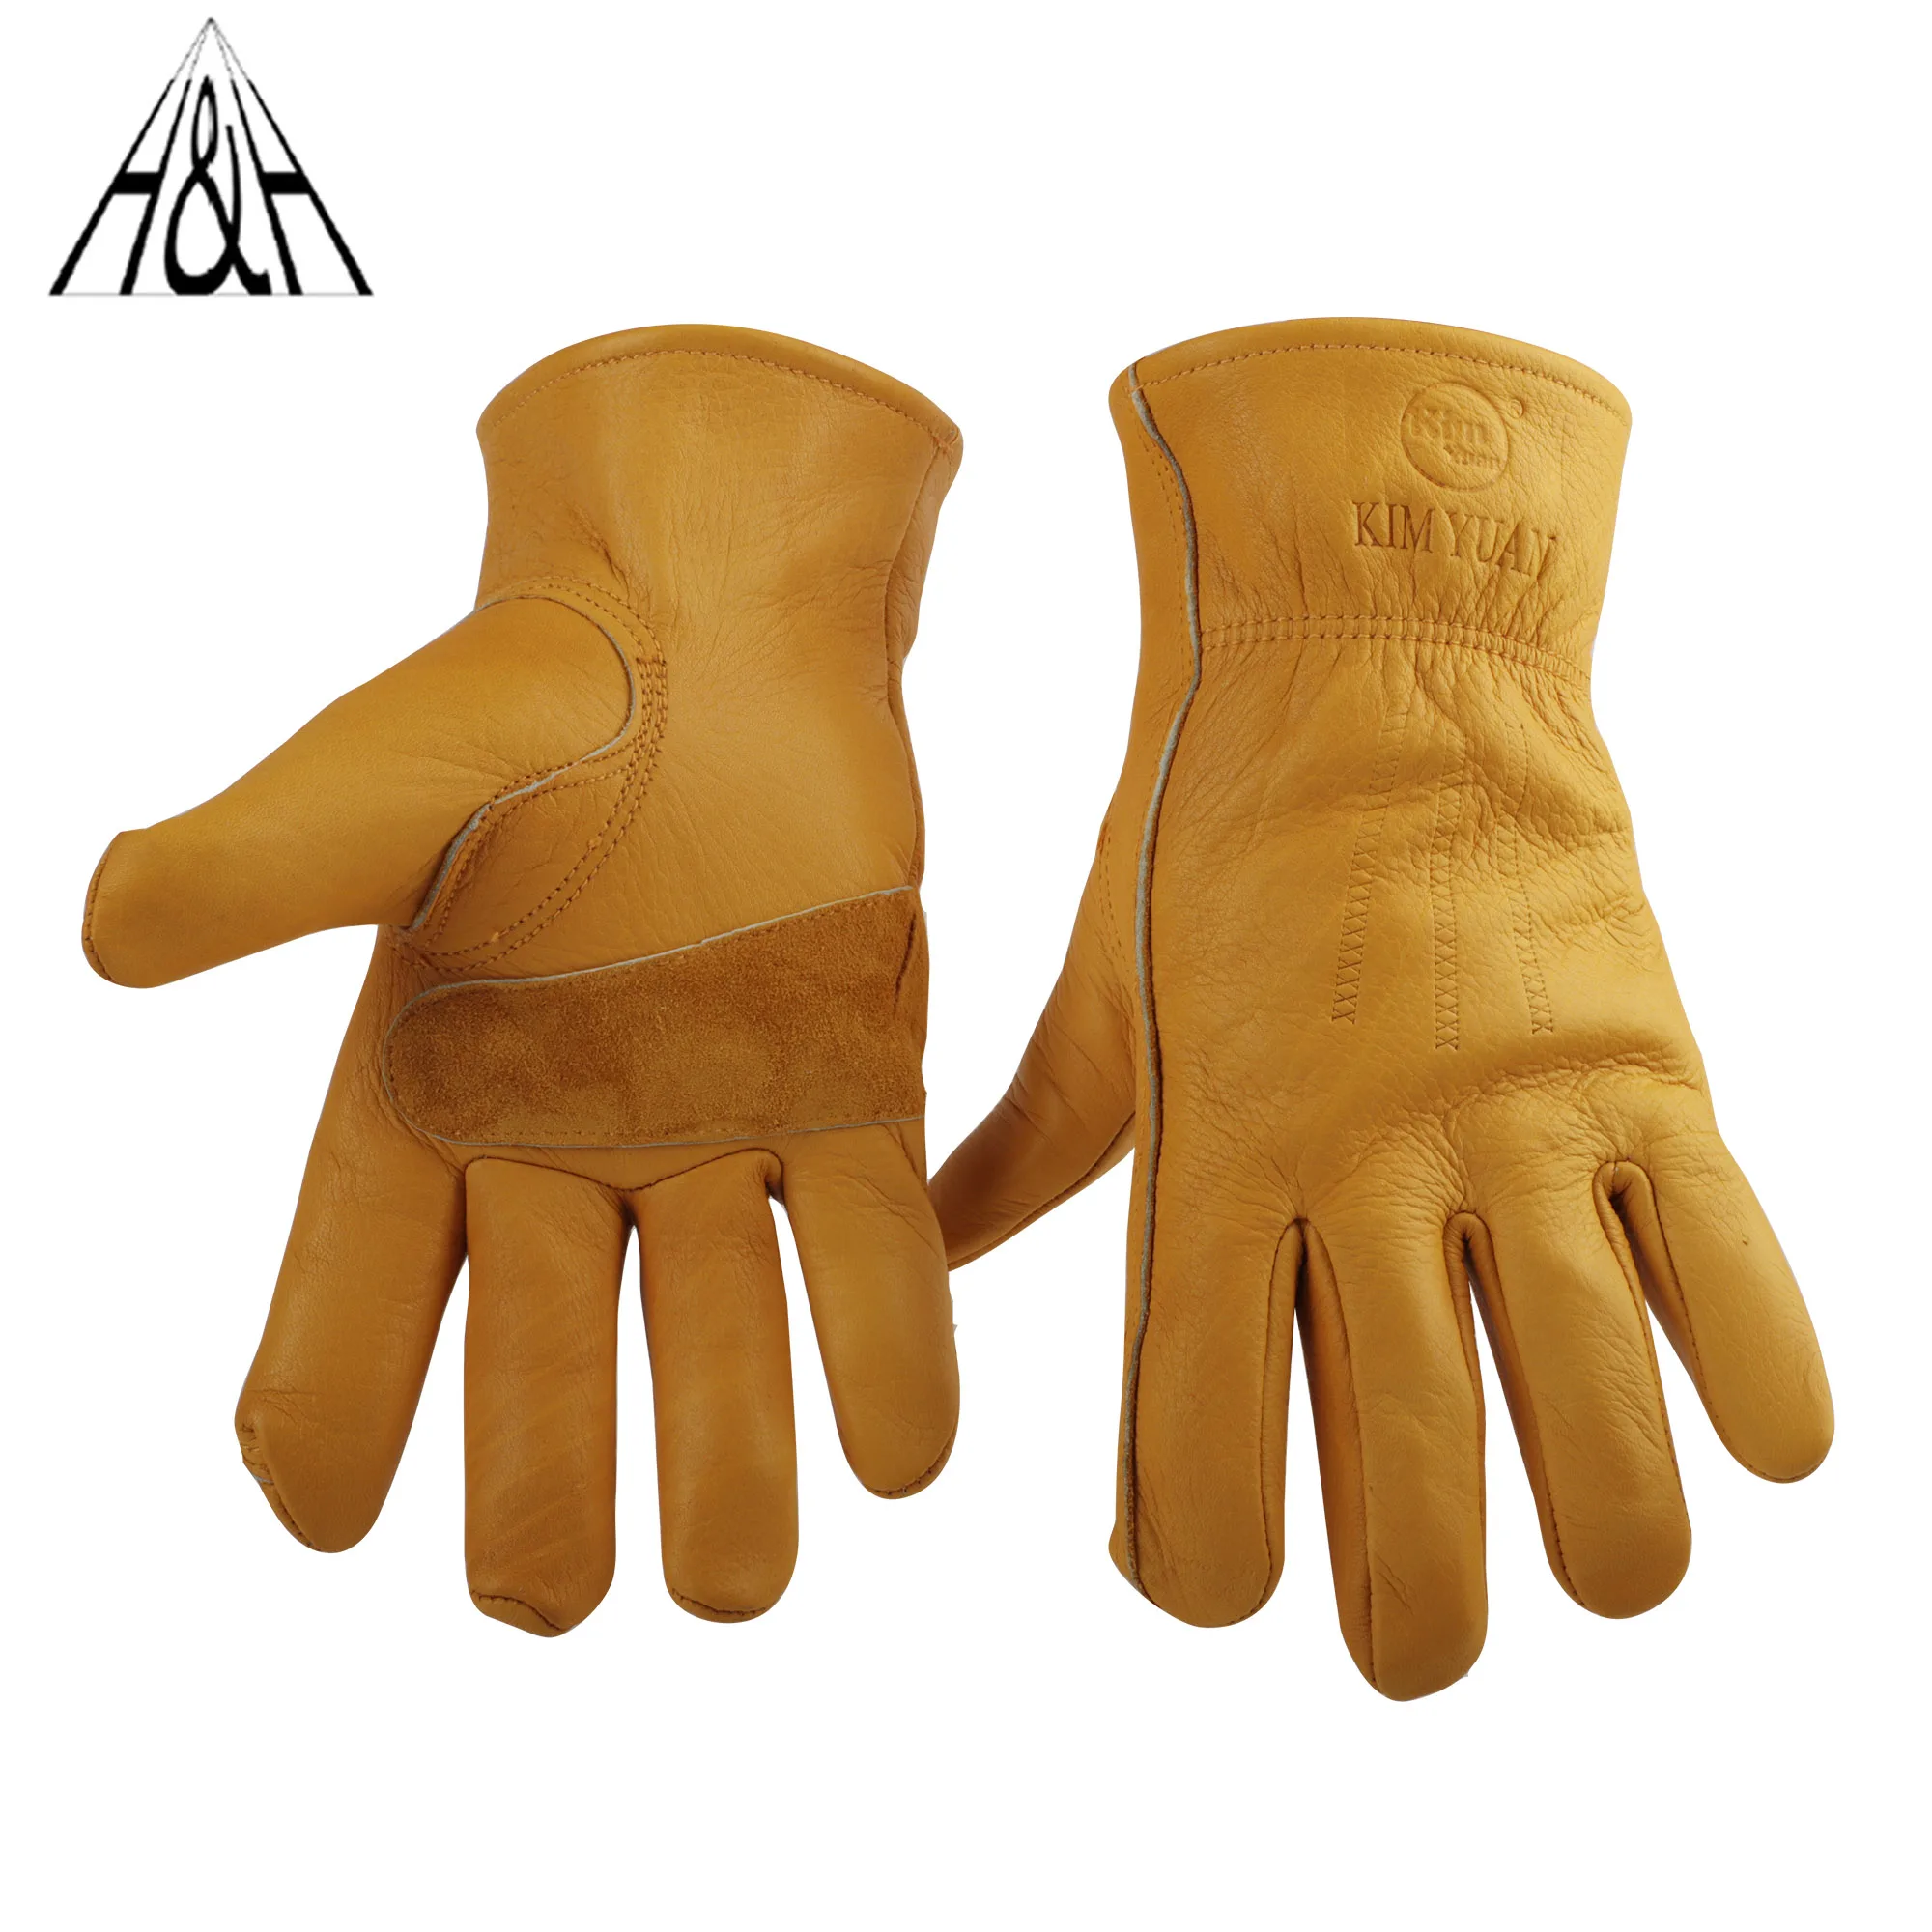 

2 PAIR HHPROTECT Work Gloves Men & Women, Utility Mechanic Working Gloves Touch Screen, Flexible Breathable Yard Work Gloves